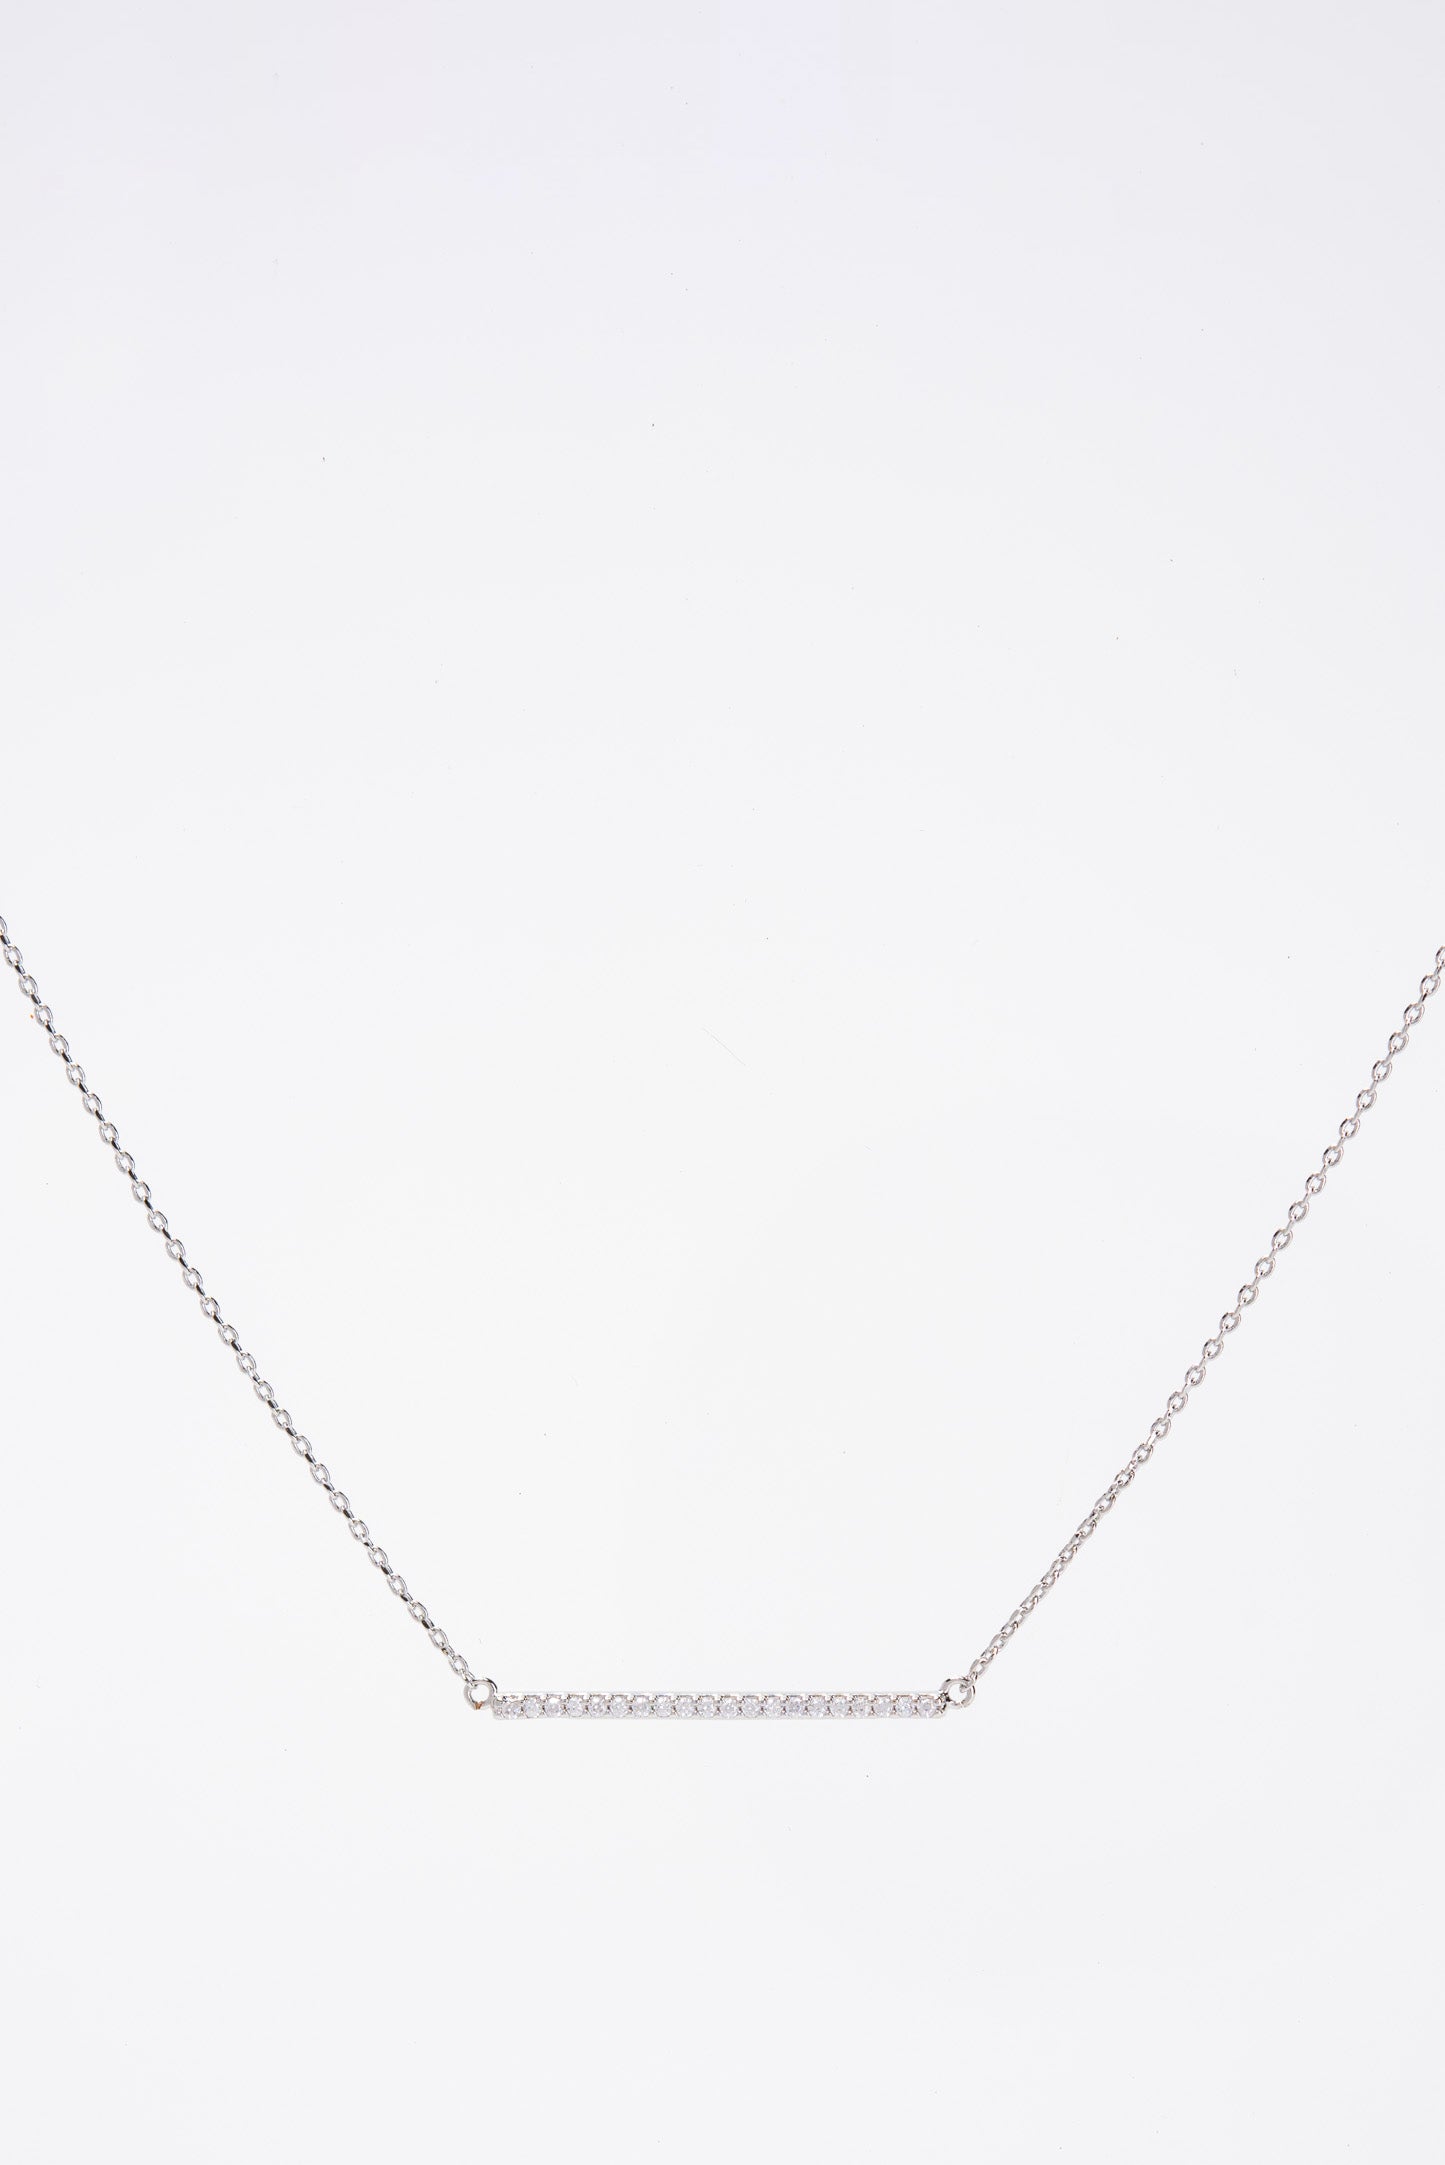 Lilly Gold Dipped CZ Bar Necklace - Silver